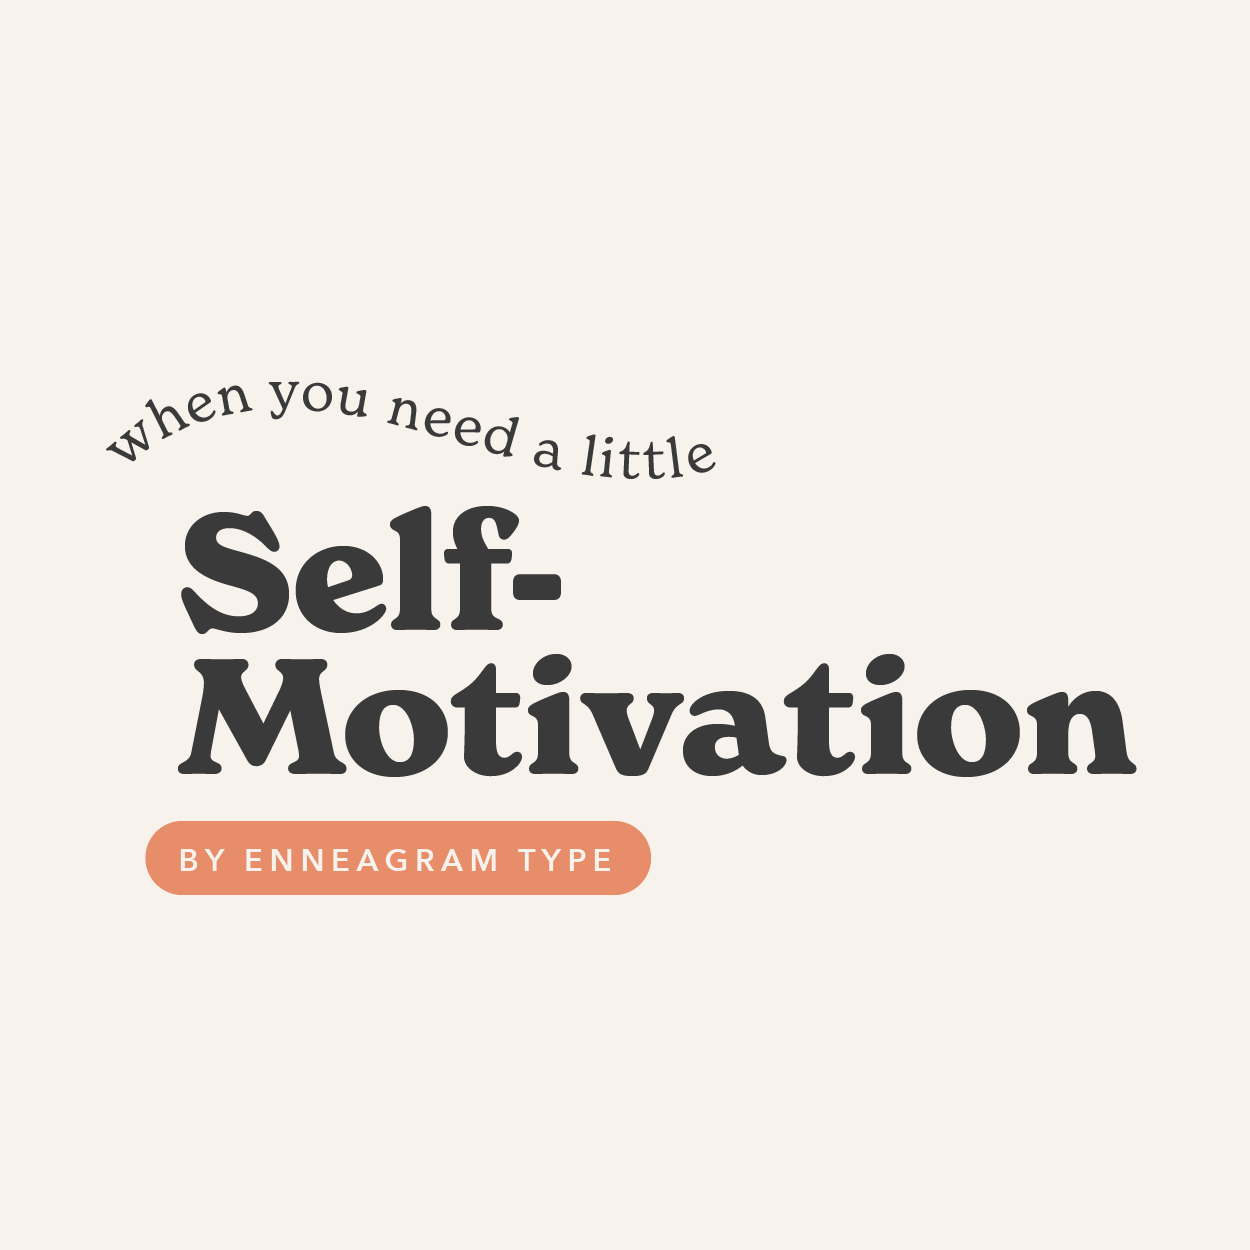 Feeling Motivated by Enneagram Type - Self-Motivation and Encouragement